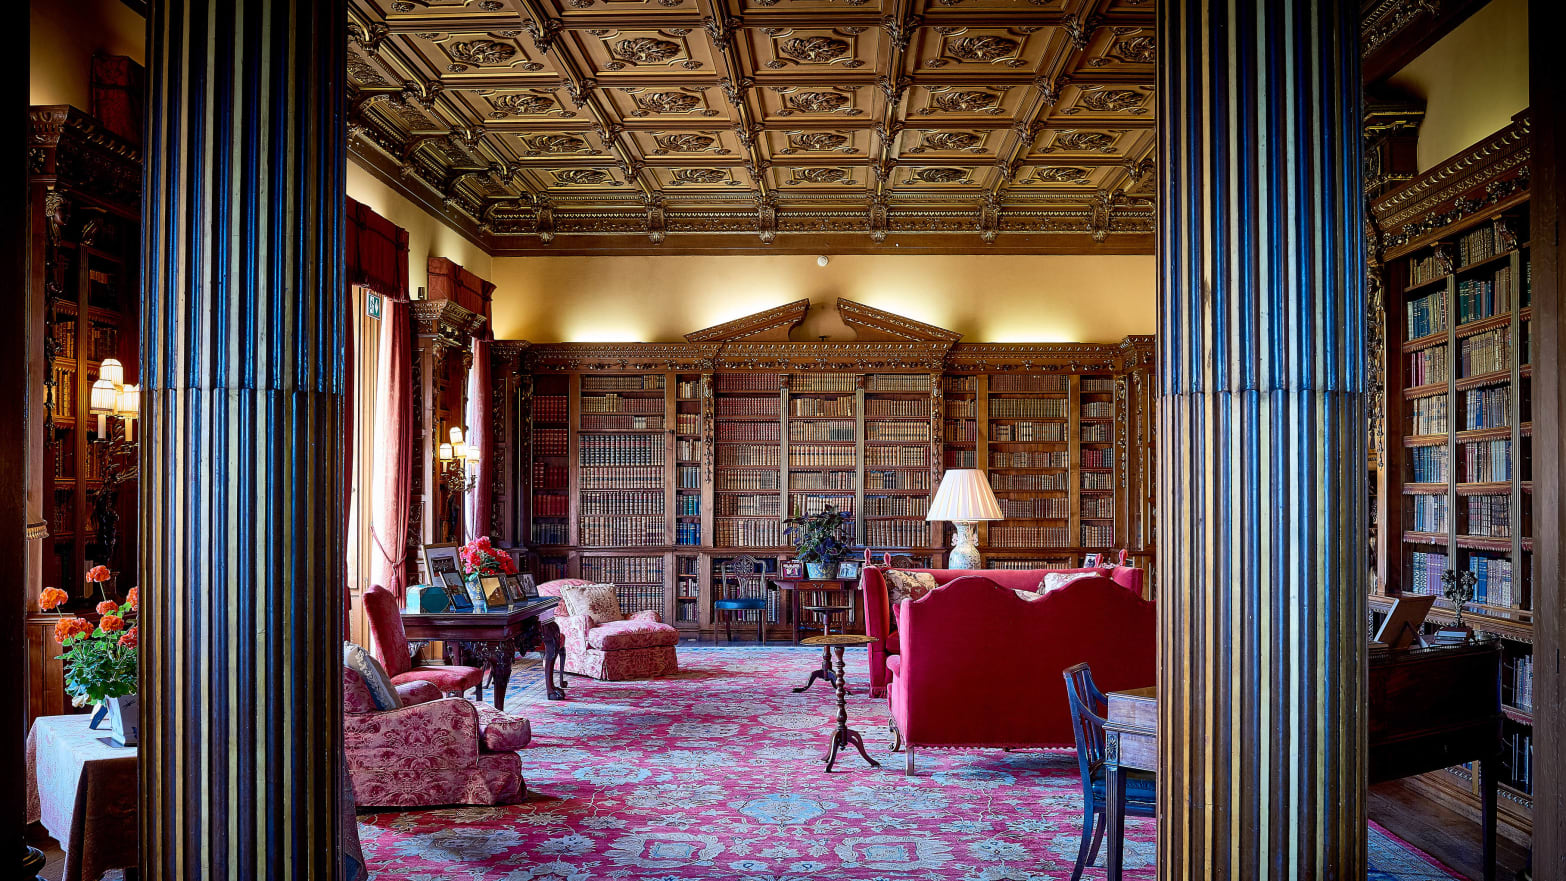 The Delightful Shock of Seeing England’s 'Downton Abbey'-Famous Library